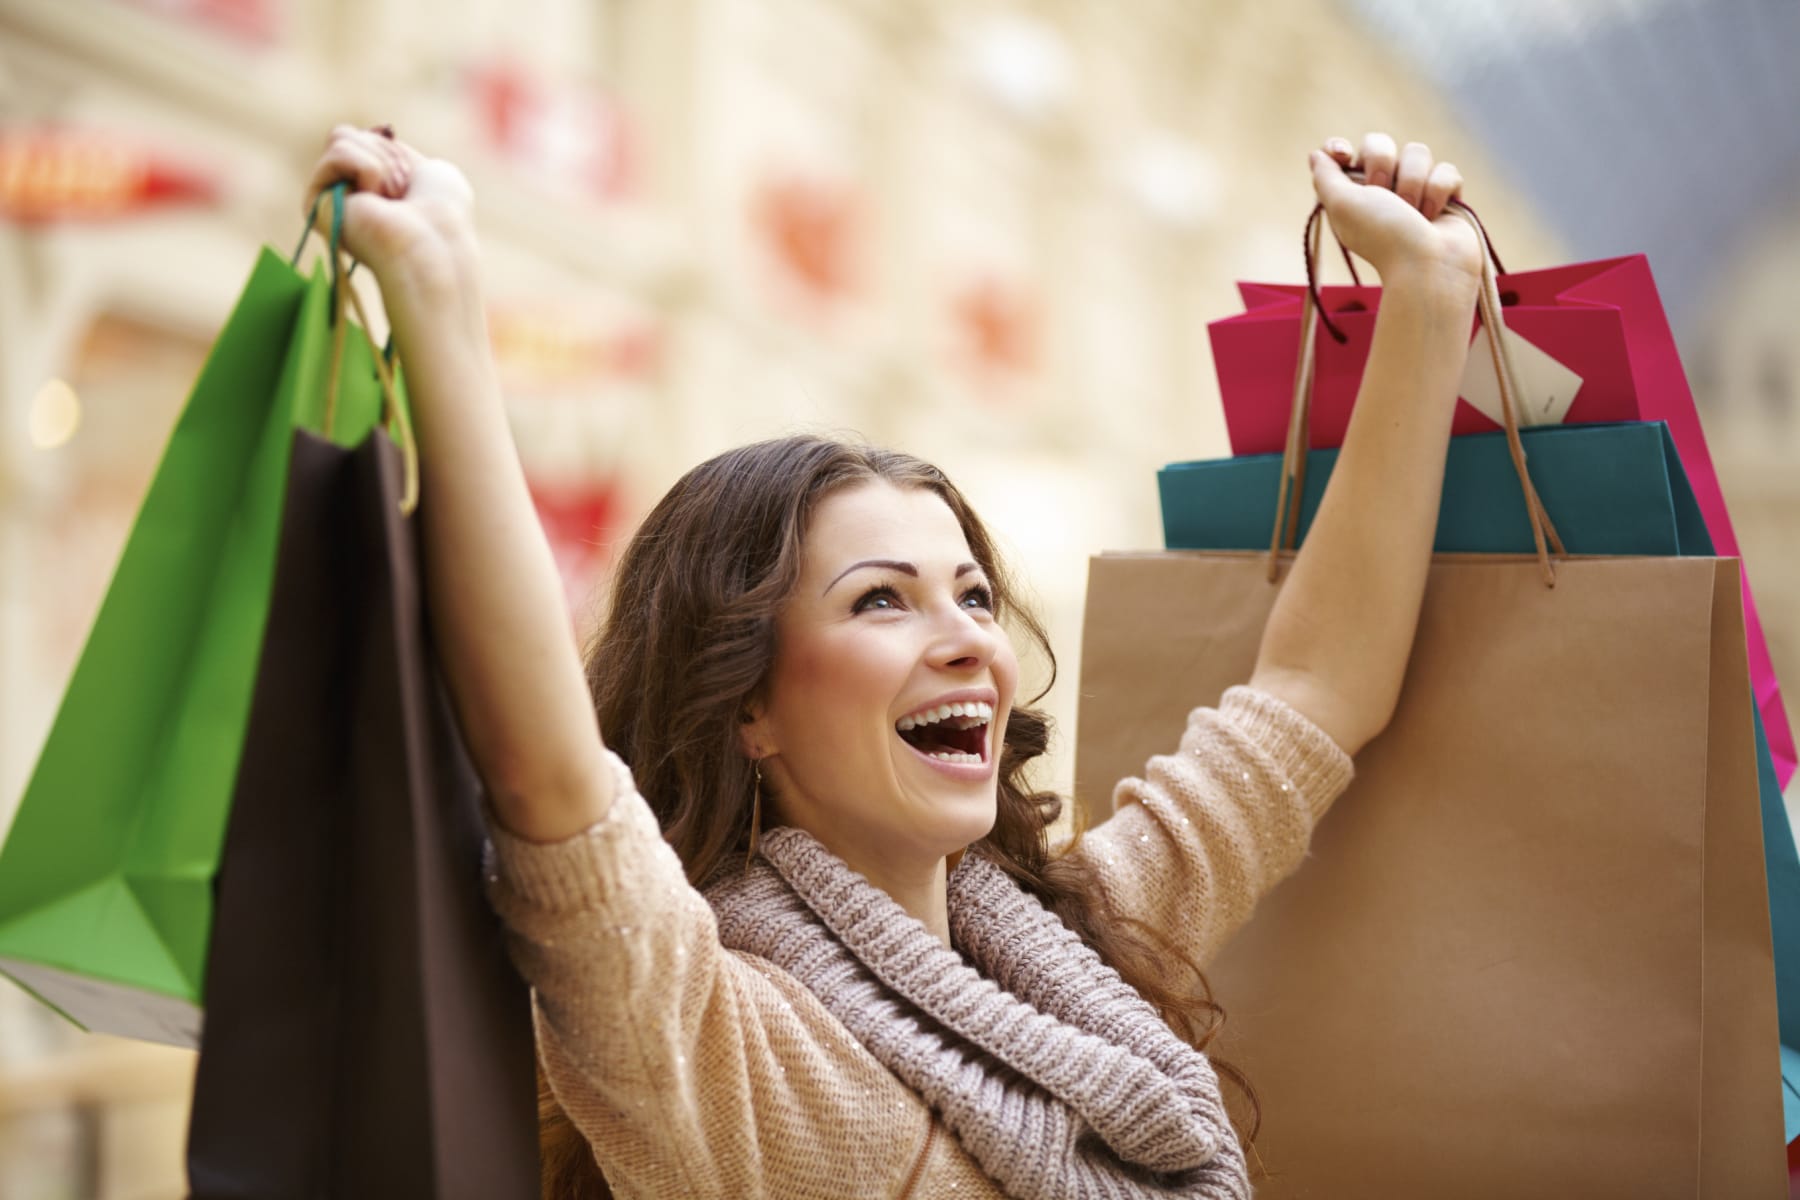 Woman excitedly raises arms full of shopping bags.